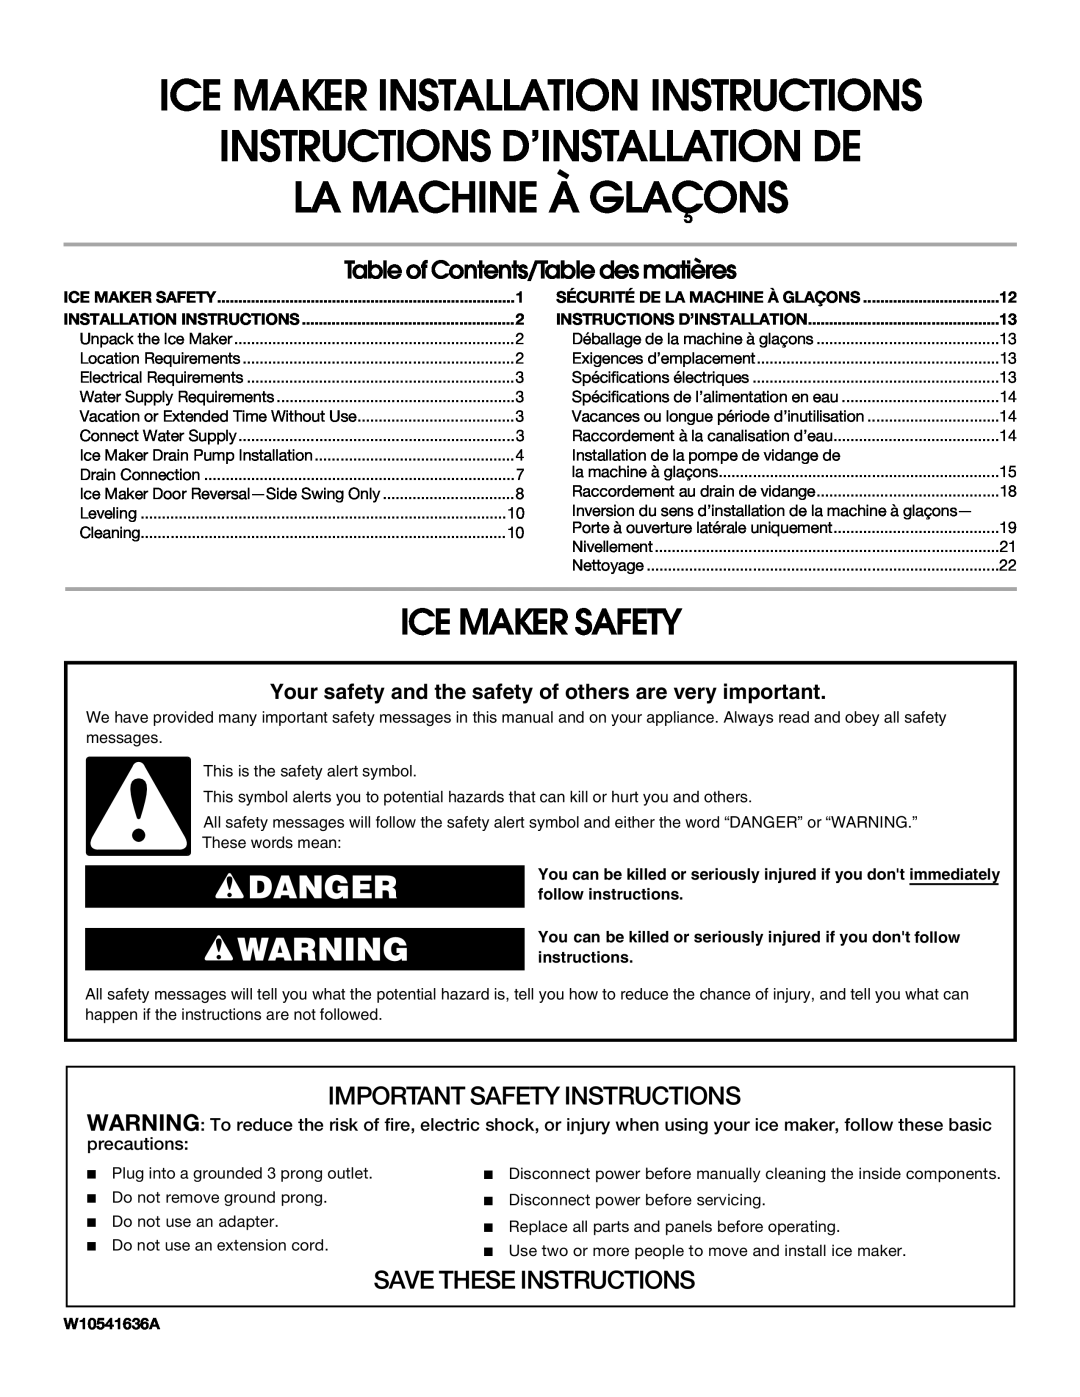 Whirlpool W10541636A important safety instructions Ice Maker Safety, Danger, Table of Contents/Table des matières 